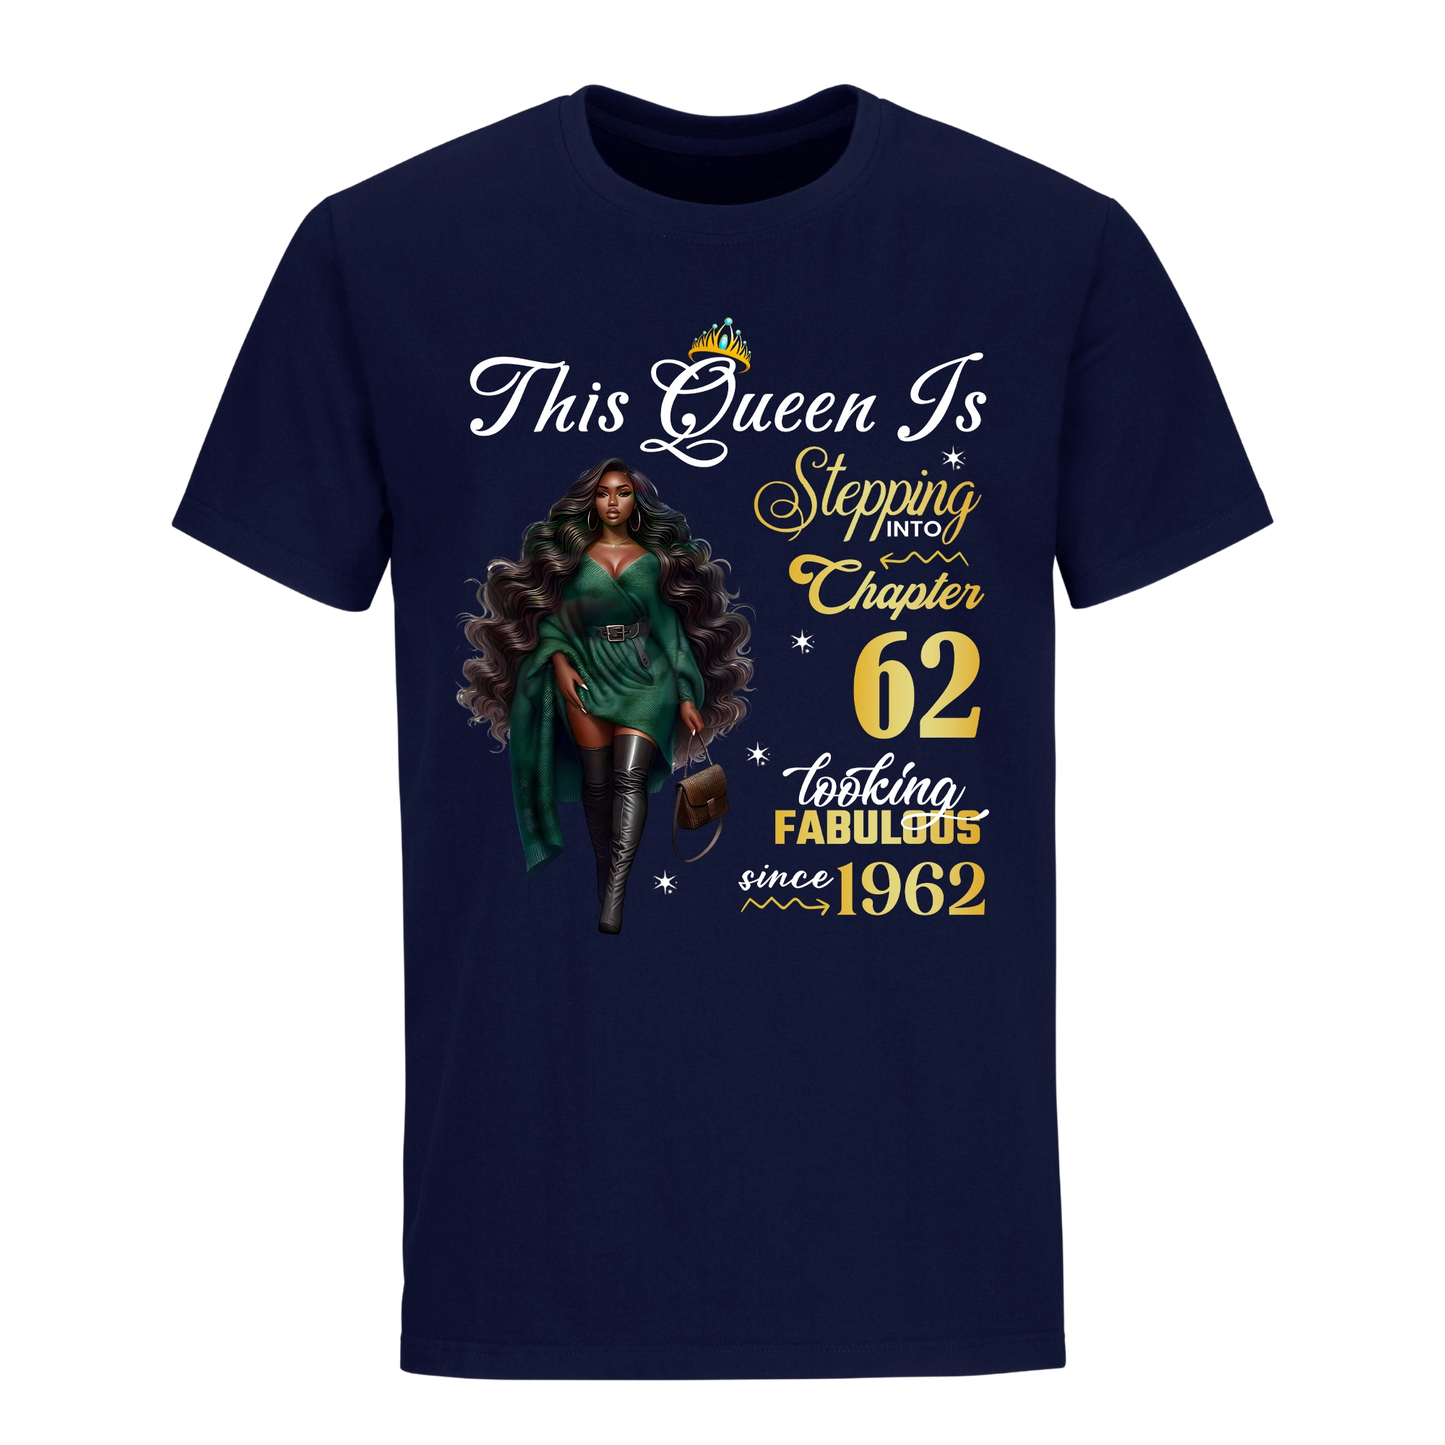 THIS QUEEN IS LOOKING FABULOUS 62 UNISEX SHIRT